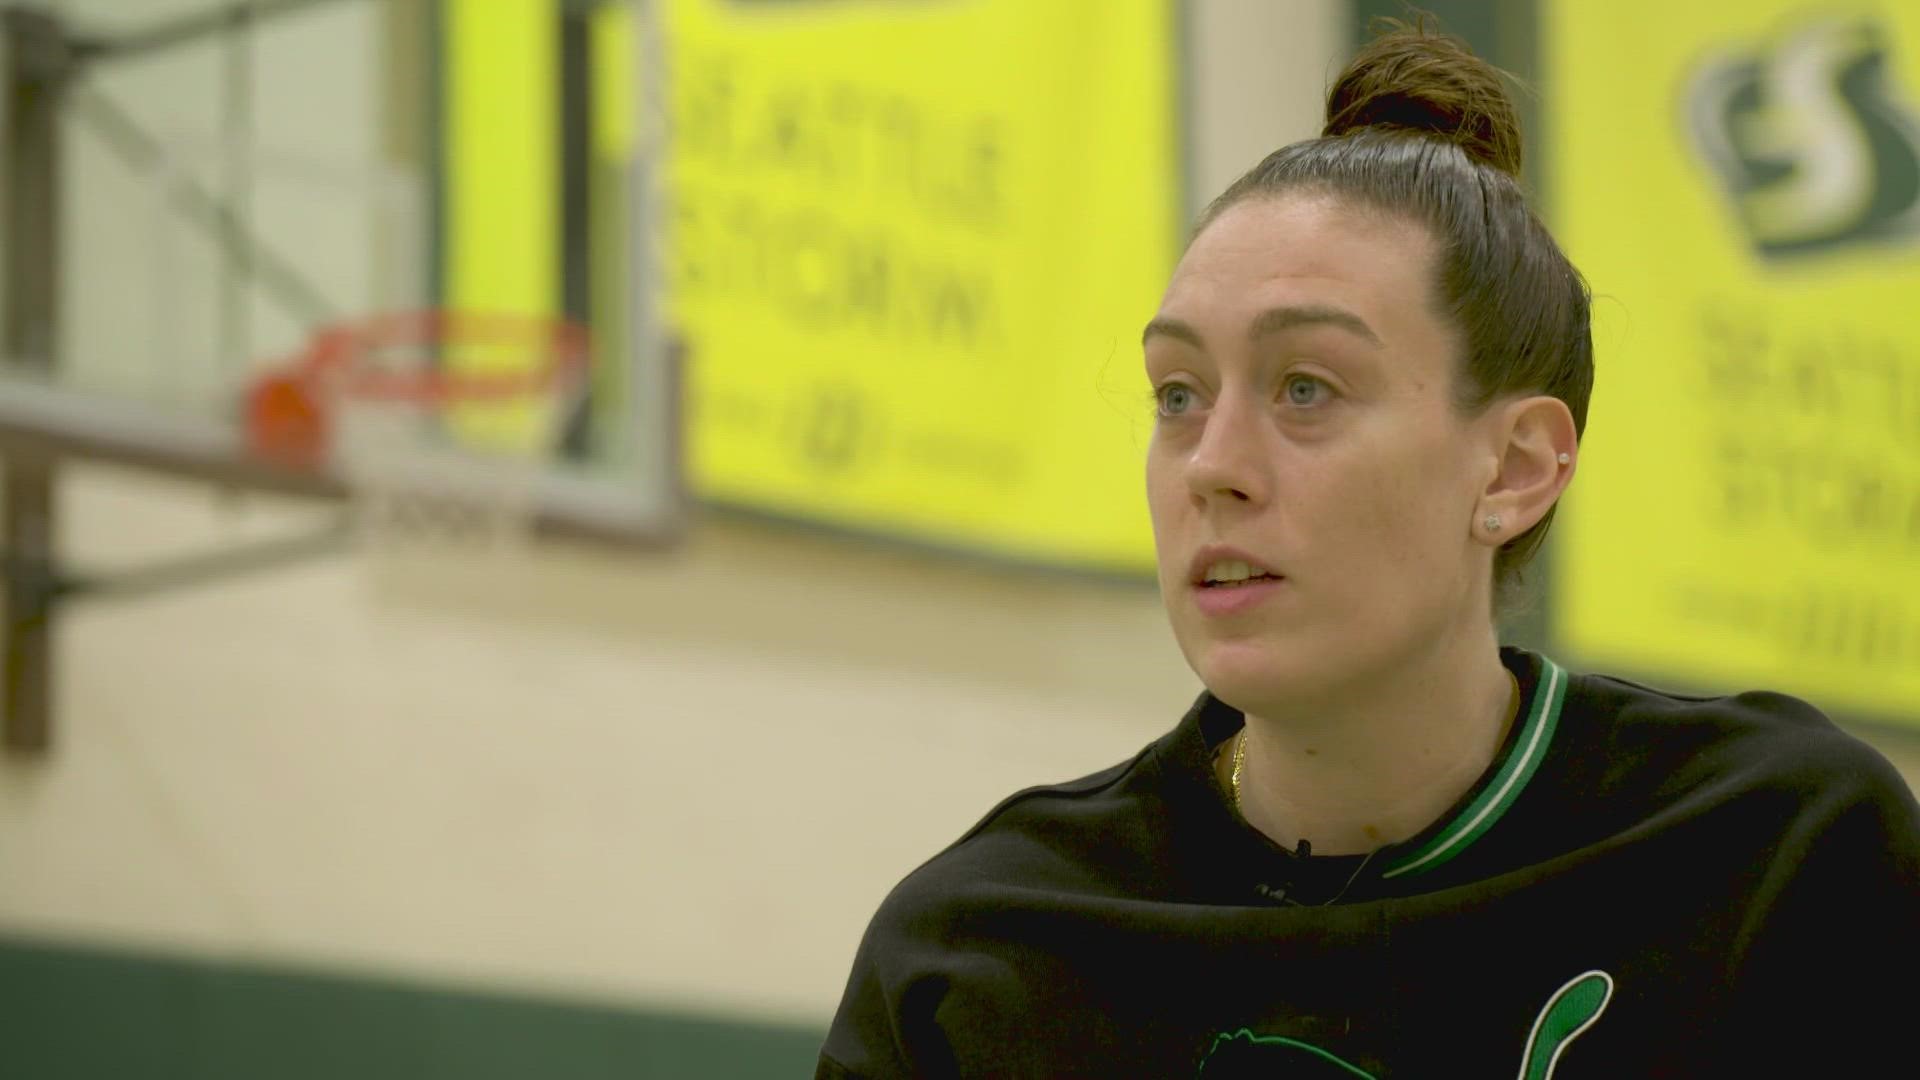 The Seattle Storm star reflects on activism, her decorated basketball career and future in the city, tonight on KING 5.